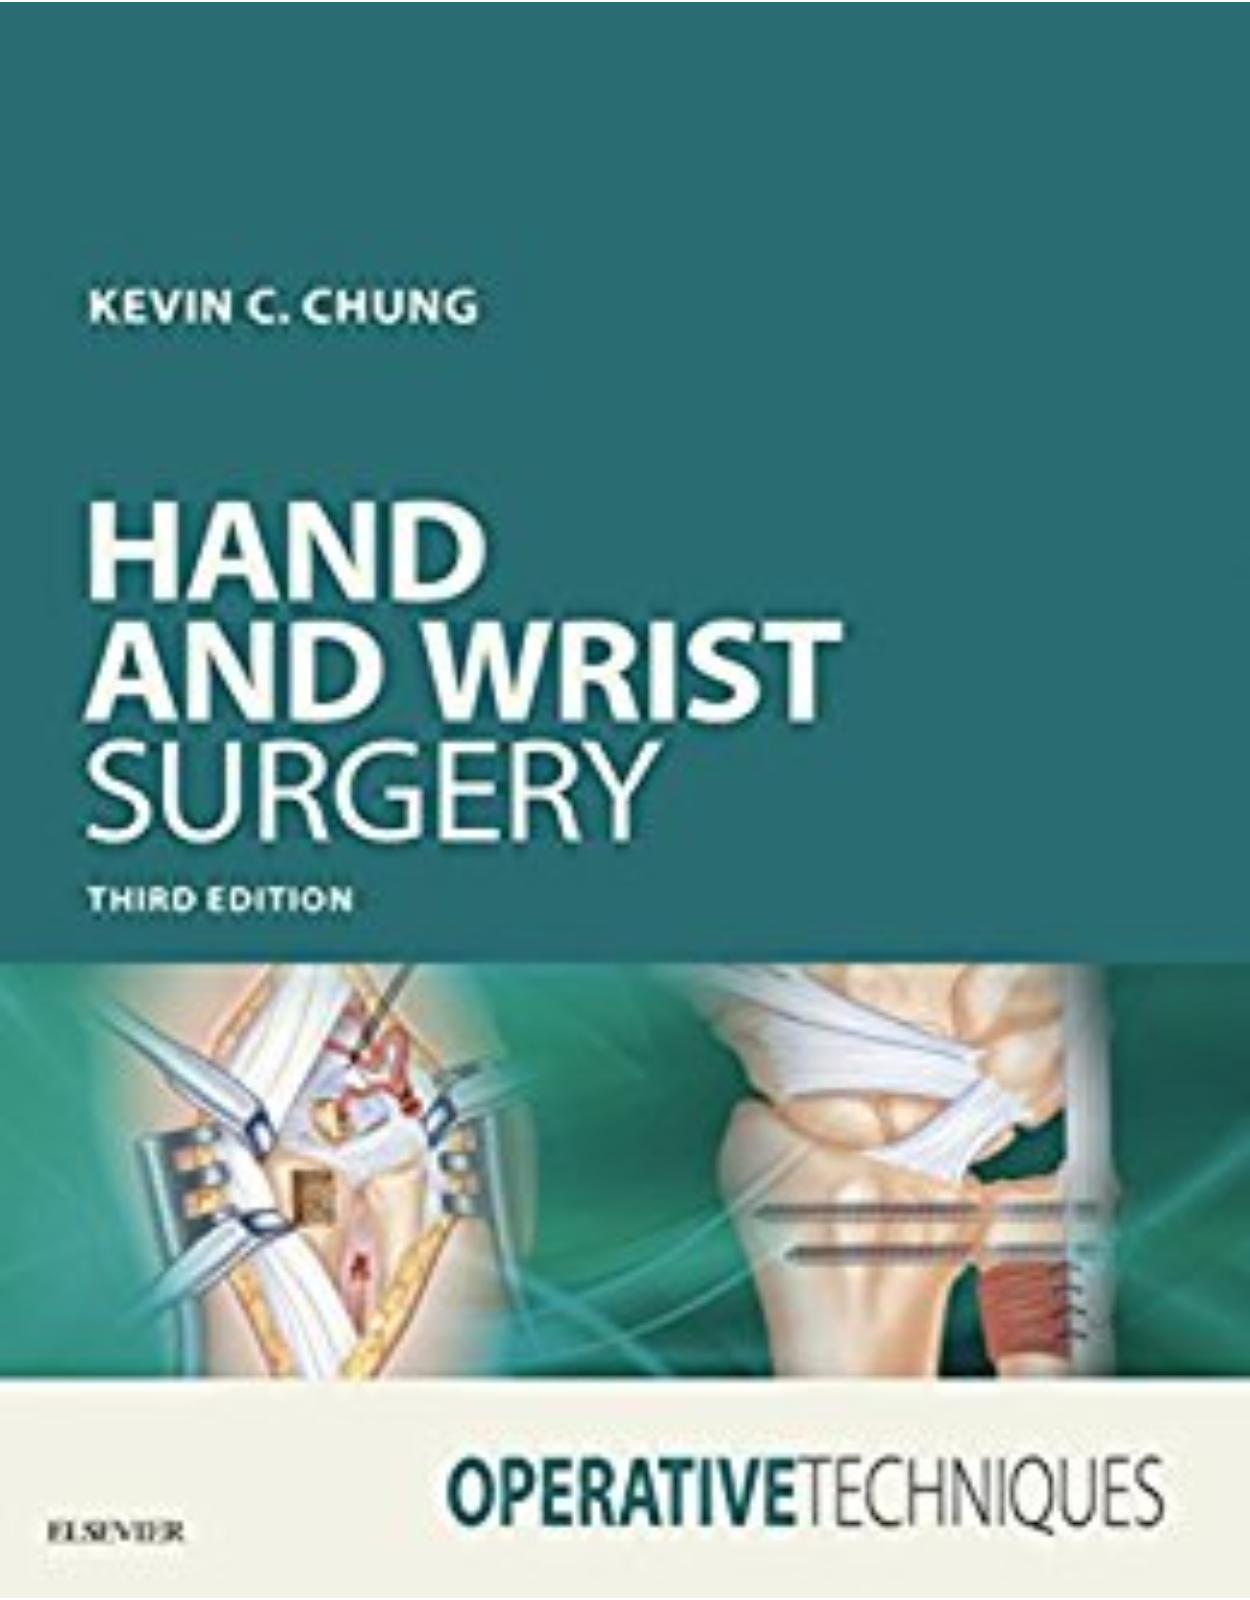 Operative Techniques: Hand and Wrist Surgery, 3rd Edition